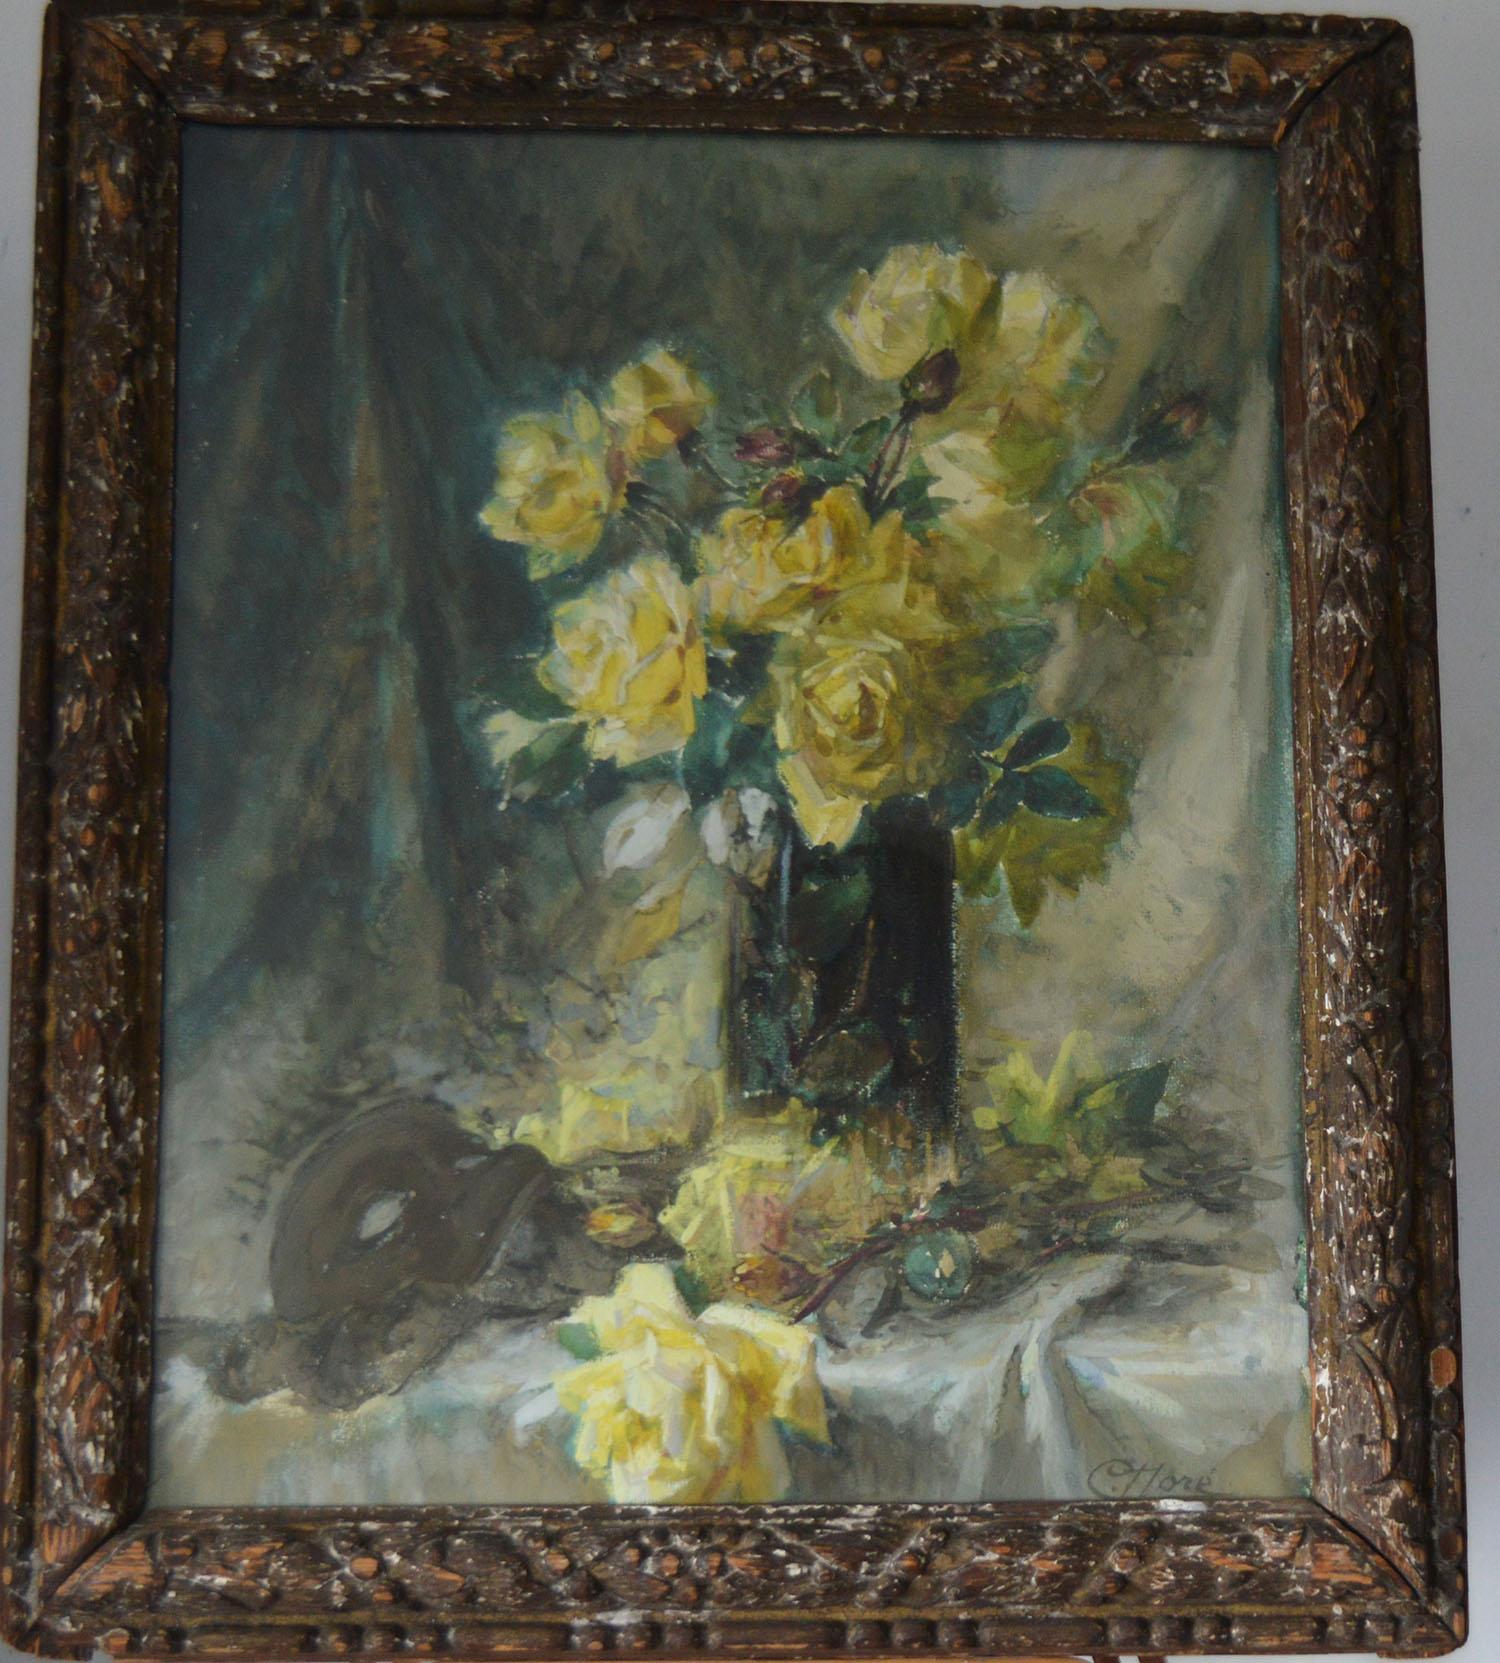 Fabulous painting or drawing of yellow roses.

Signed C.Dore bottom right.

Water color on paper

Presented in a distressed 18th century giltwood frame

The measurement given below is the frame size.